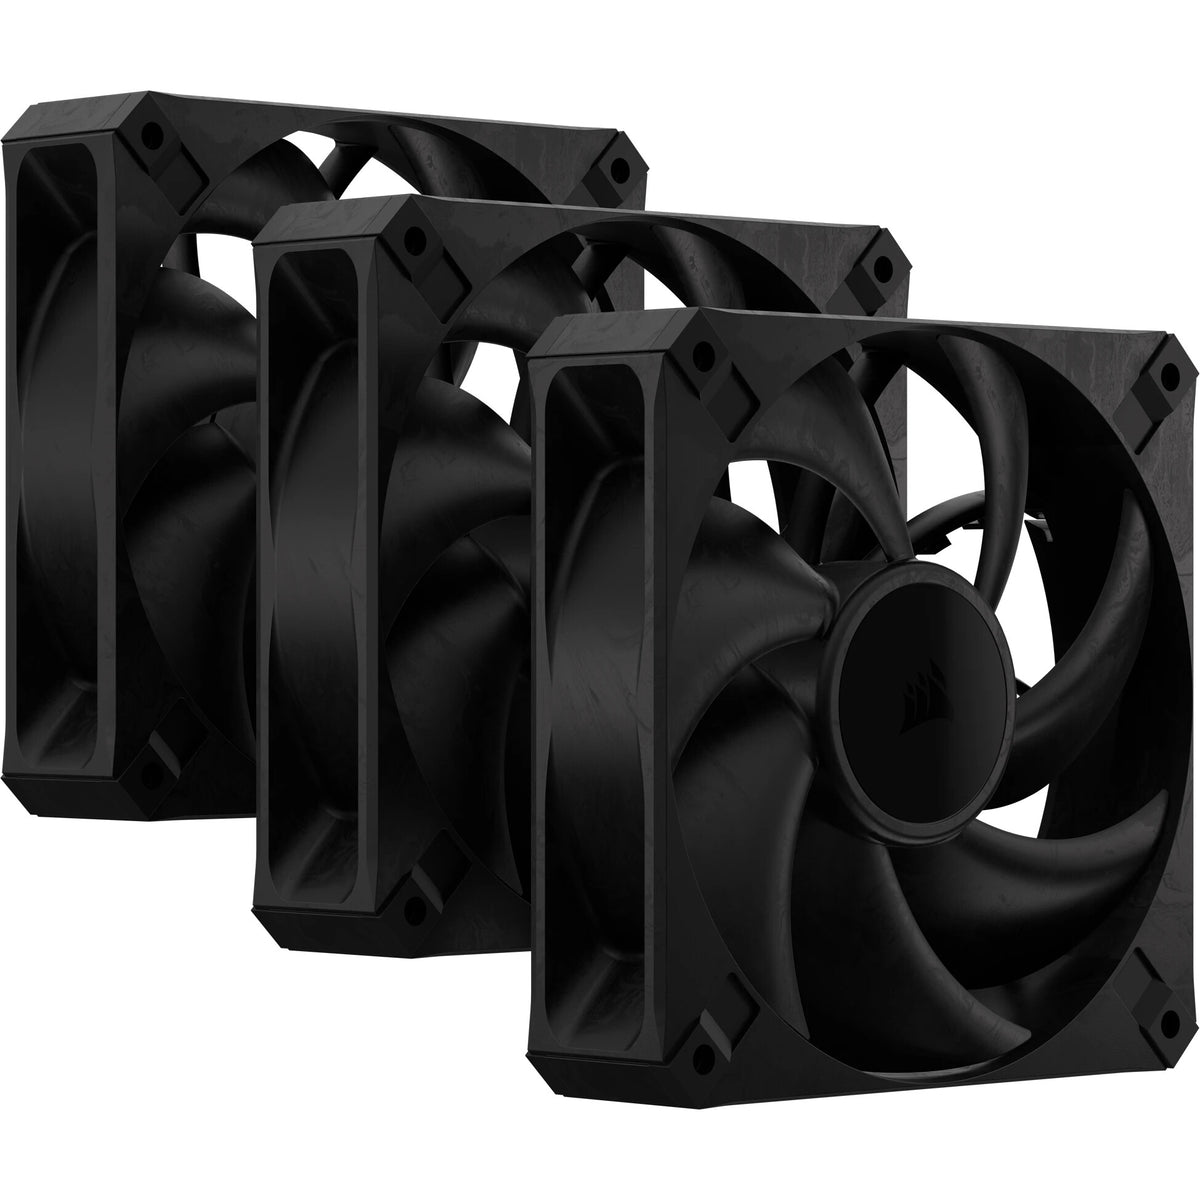 Corsair RS120 MAX - Computer Case Fan in Black - 120mm (Pack of 3)